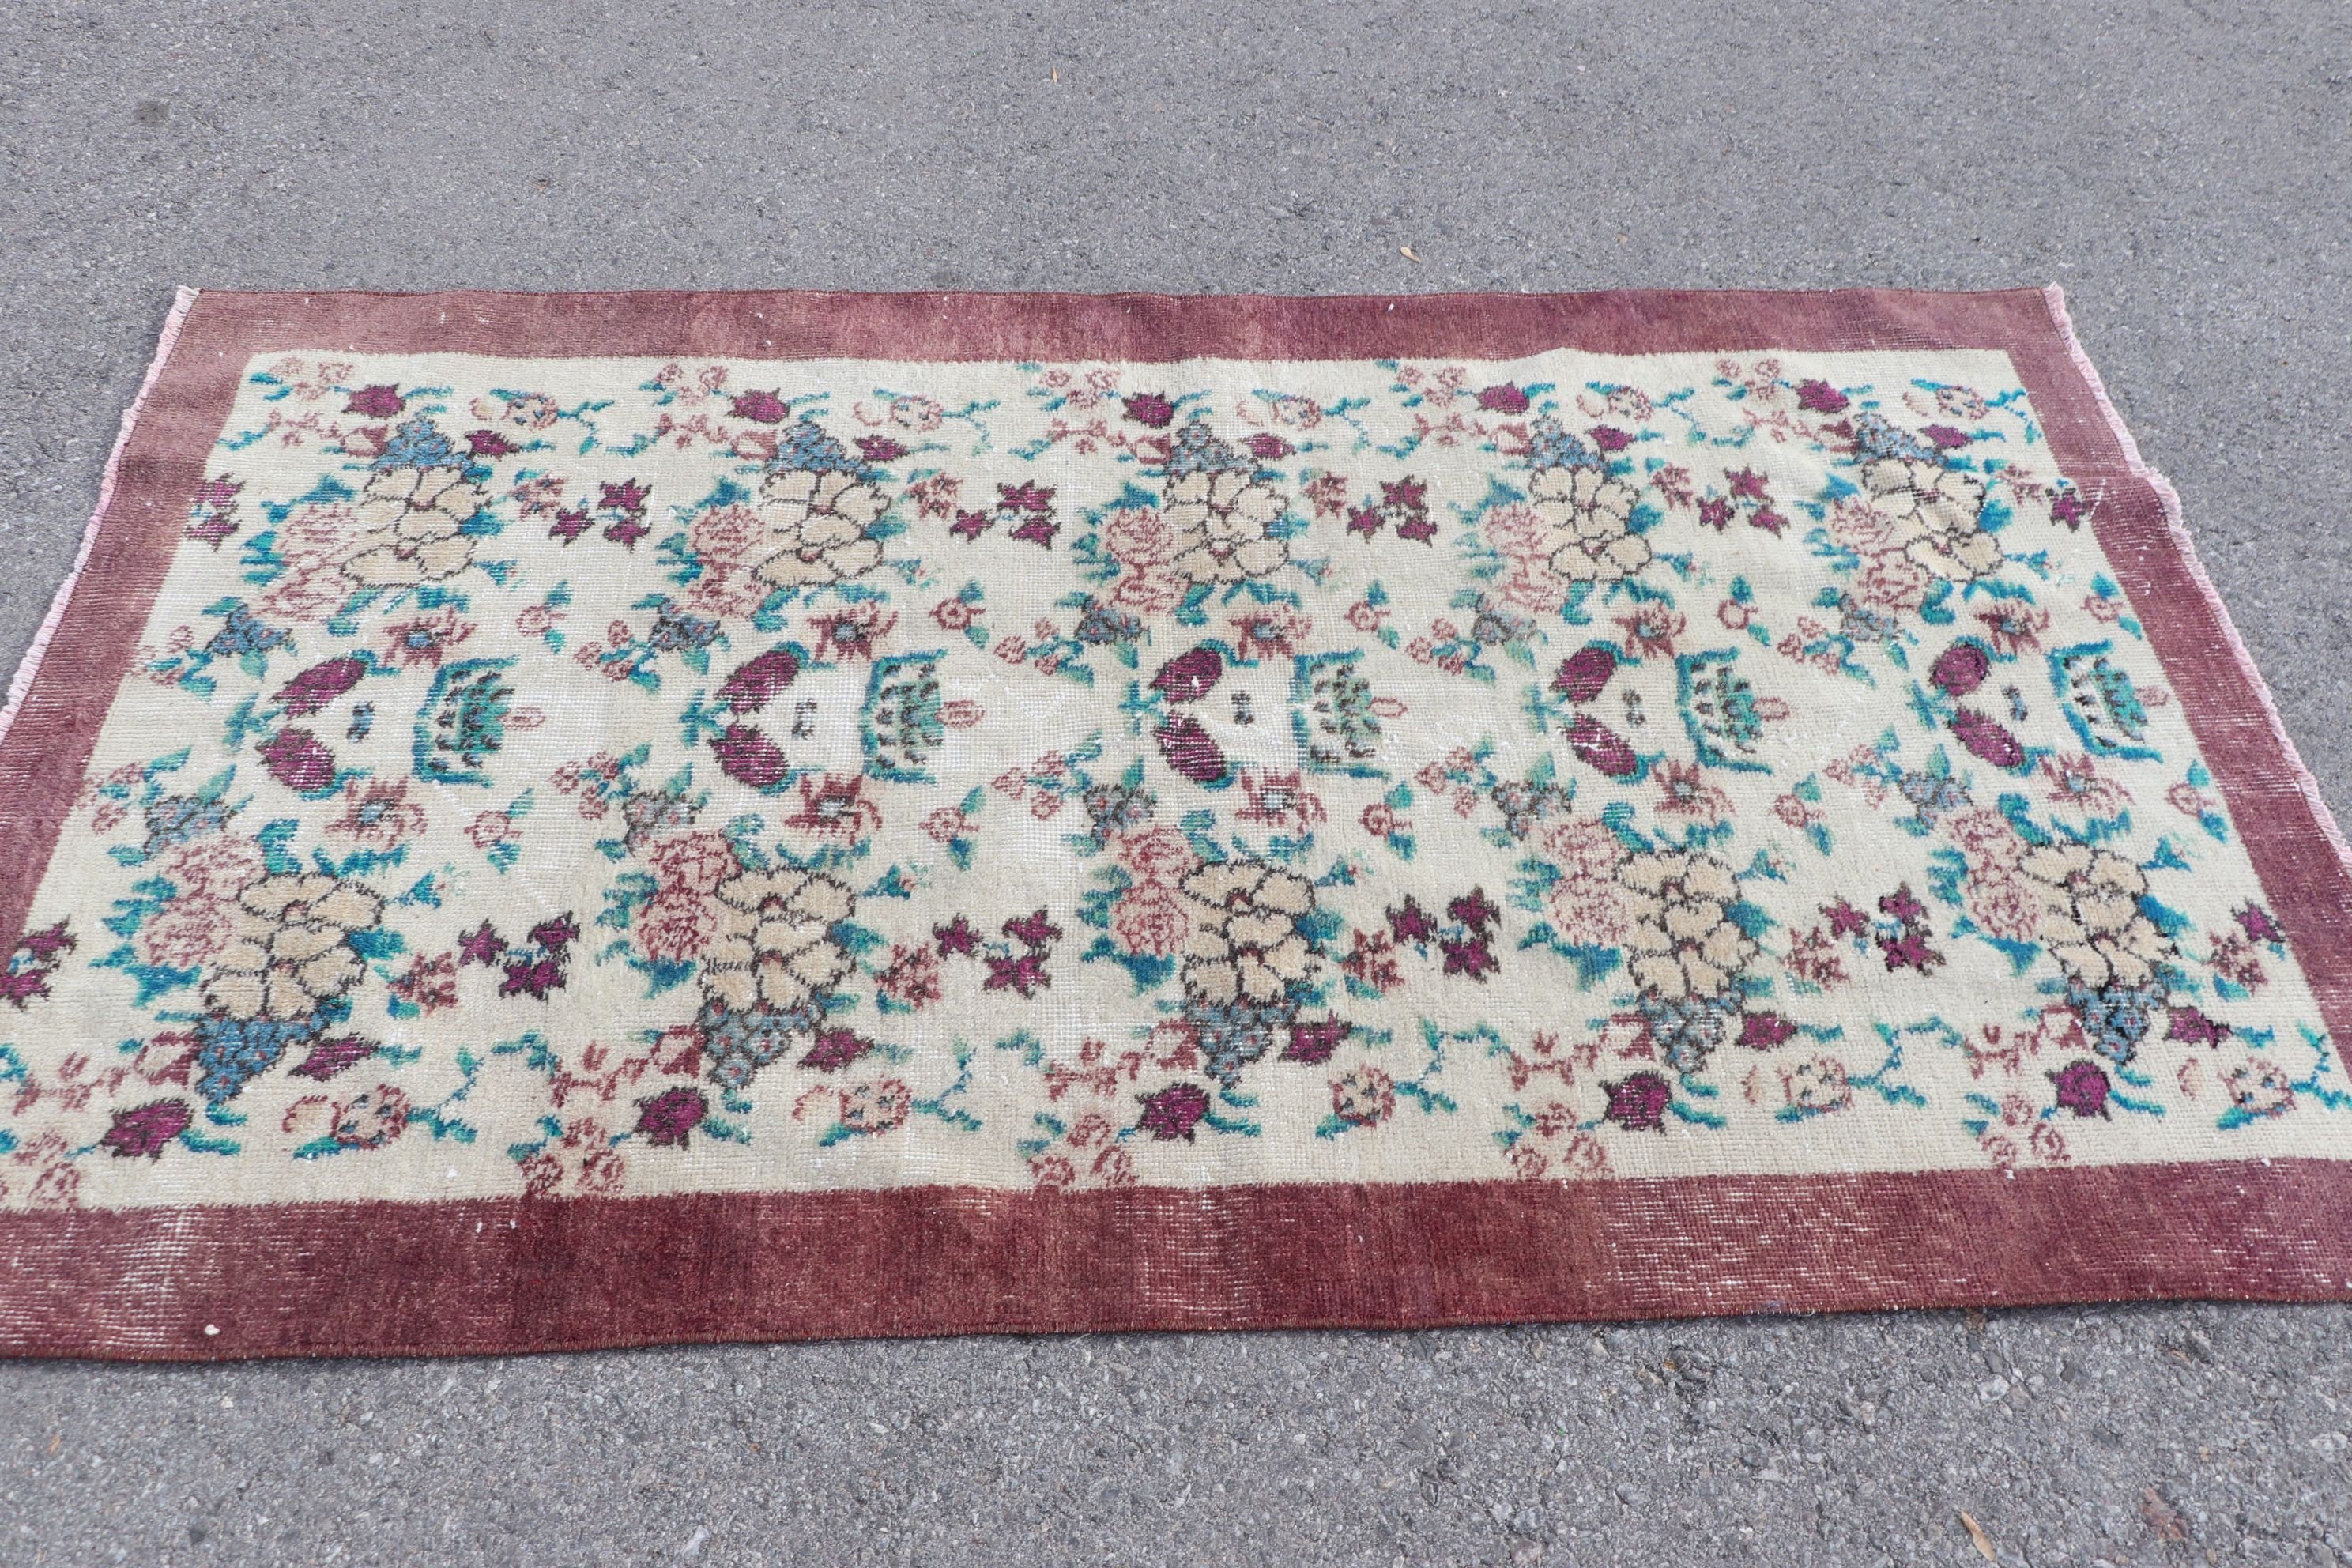 Old Rug, Turkish Rug, Antique Rugs, Vintage Rugs, Kitchen Rugs, Cool Rug, 3.5x6.3 ft Accent Rug, Rugs for Entry, Nursery Rug, Red Cool Rug